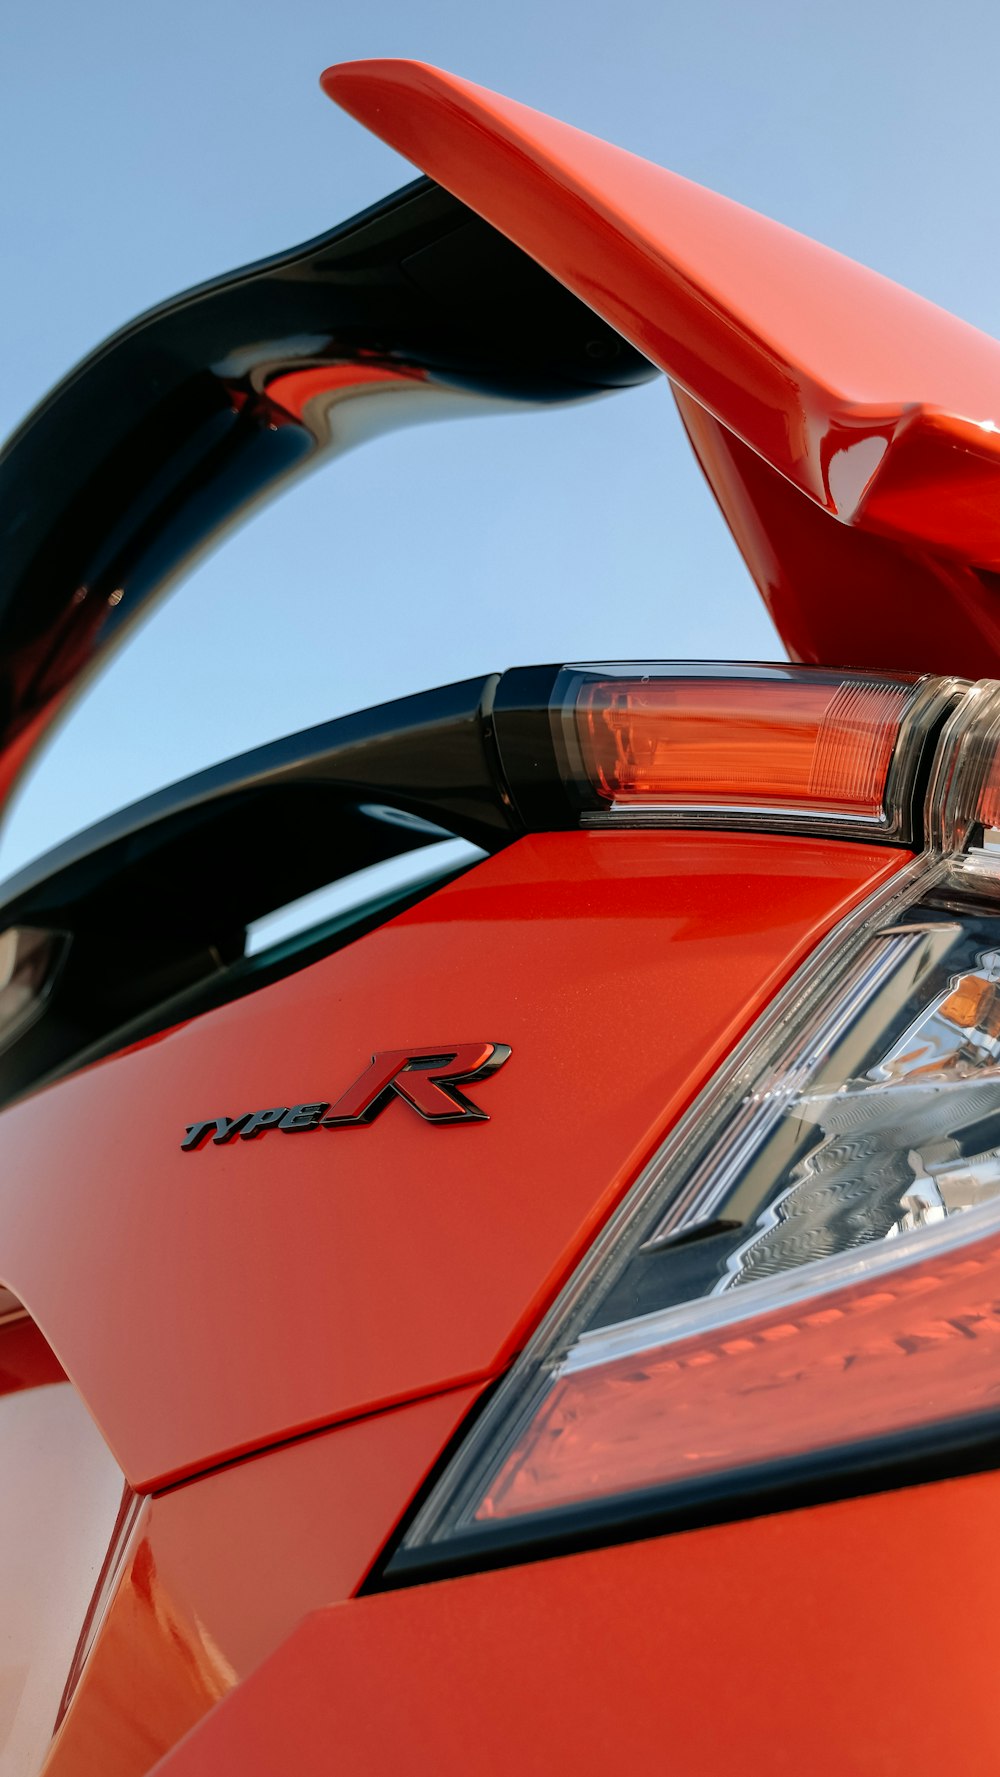 a close up of the tail lights of a red sports car